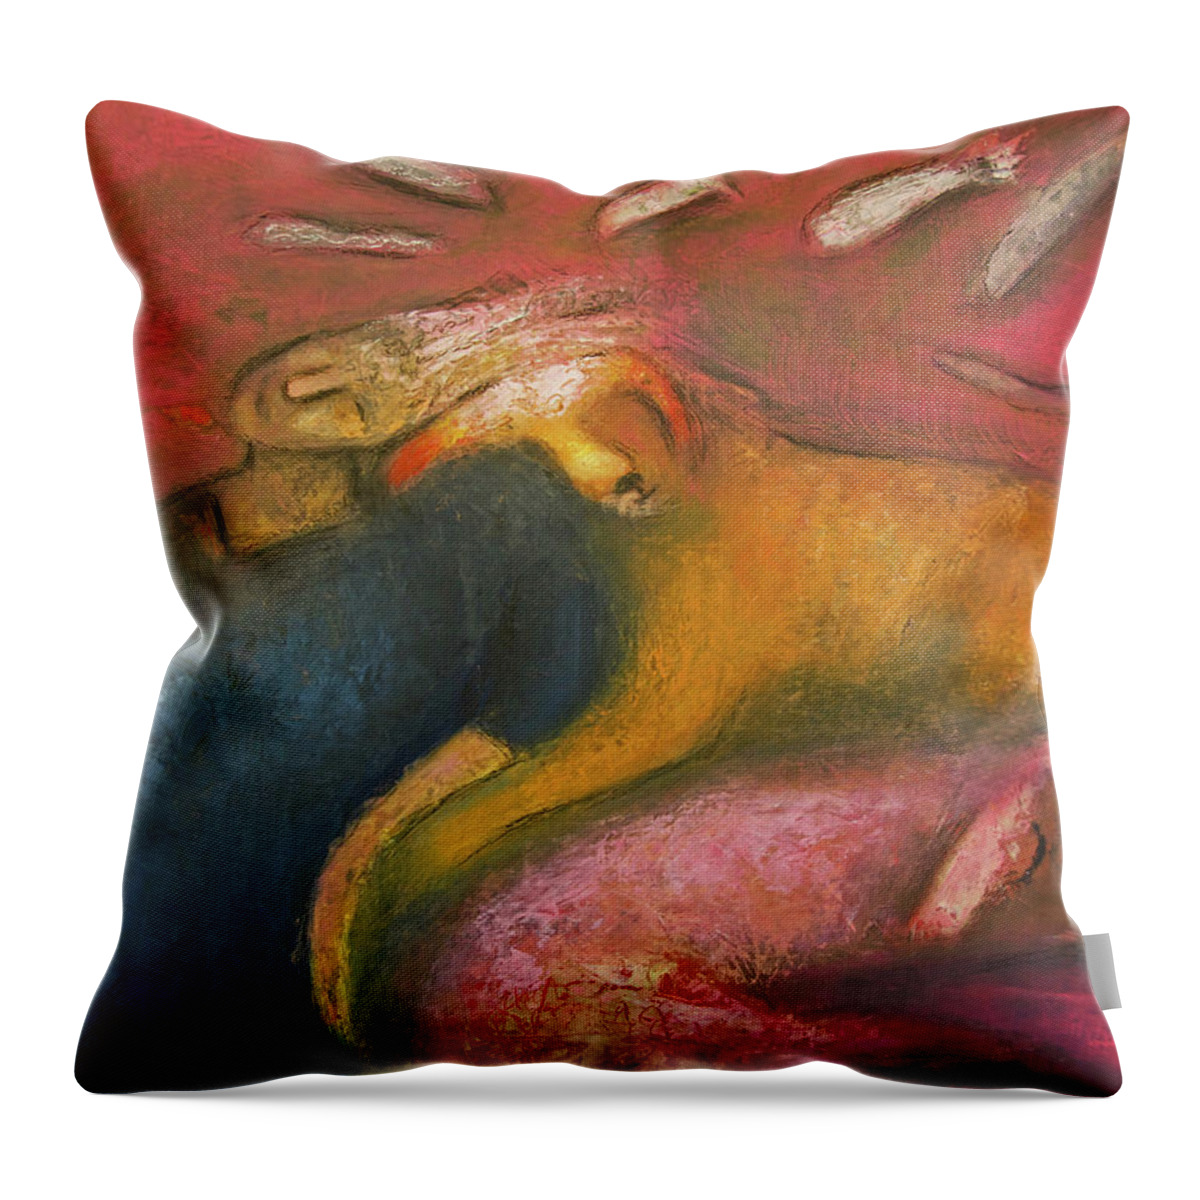 Oil Painting Throw Pillow featuring the painting Inside their dreaming by Suzy Norris